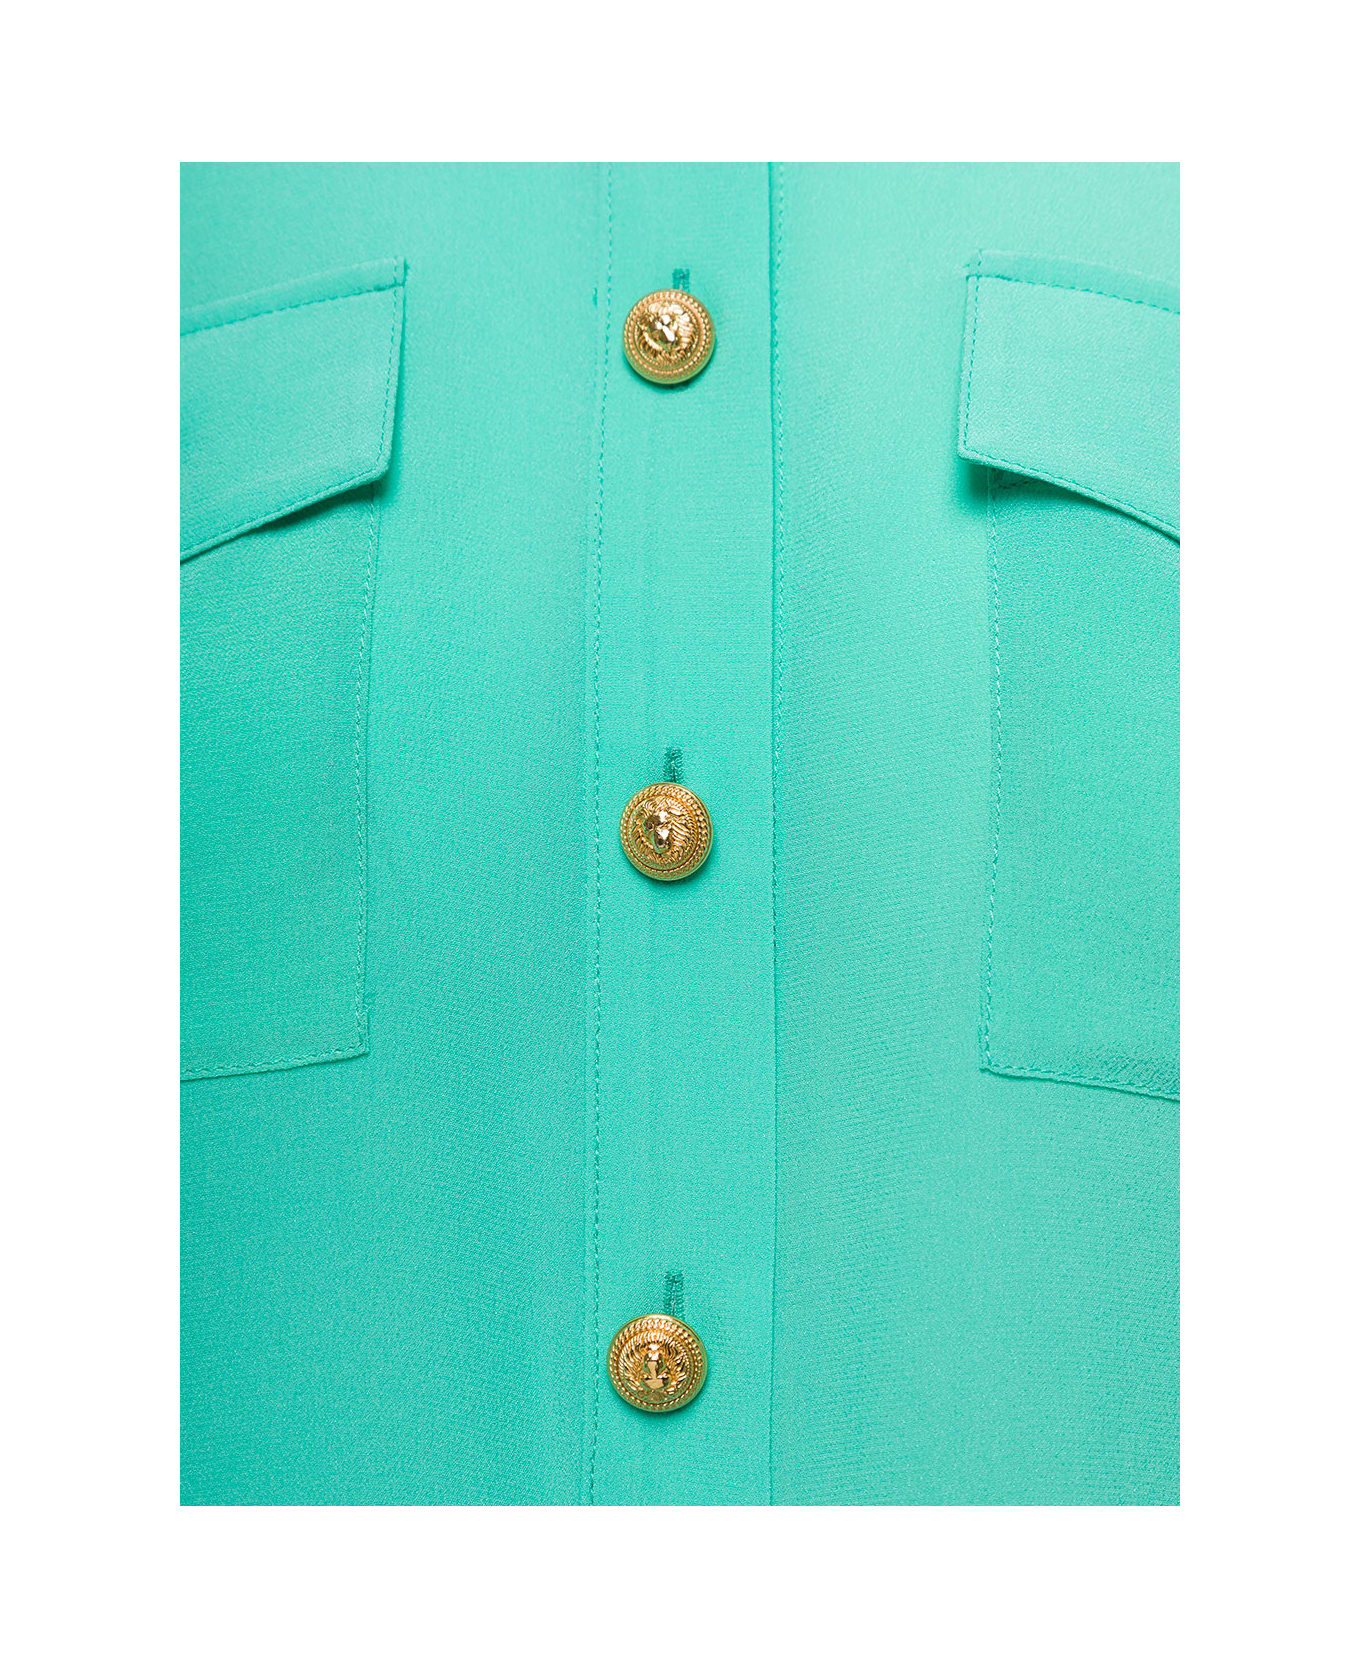 Balmain Light Blue Shirt With Jewel Buttons And Pockets In Crepe De Chine Woman - Green